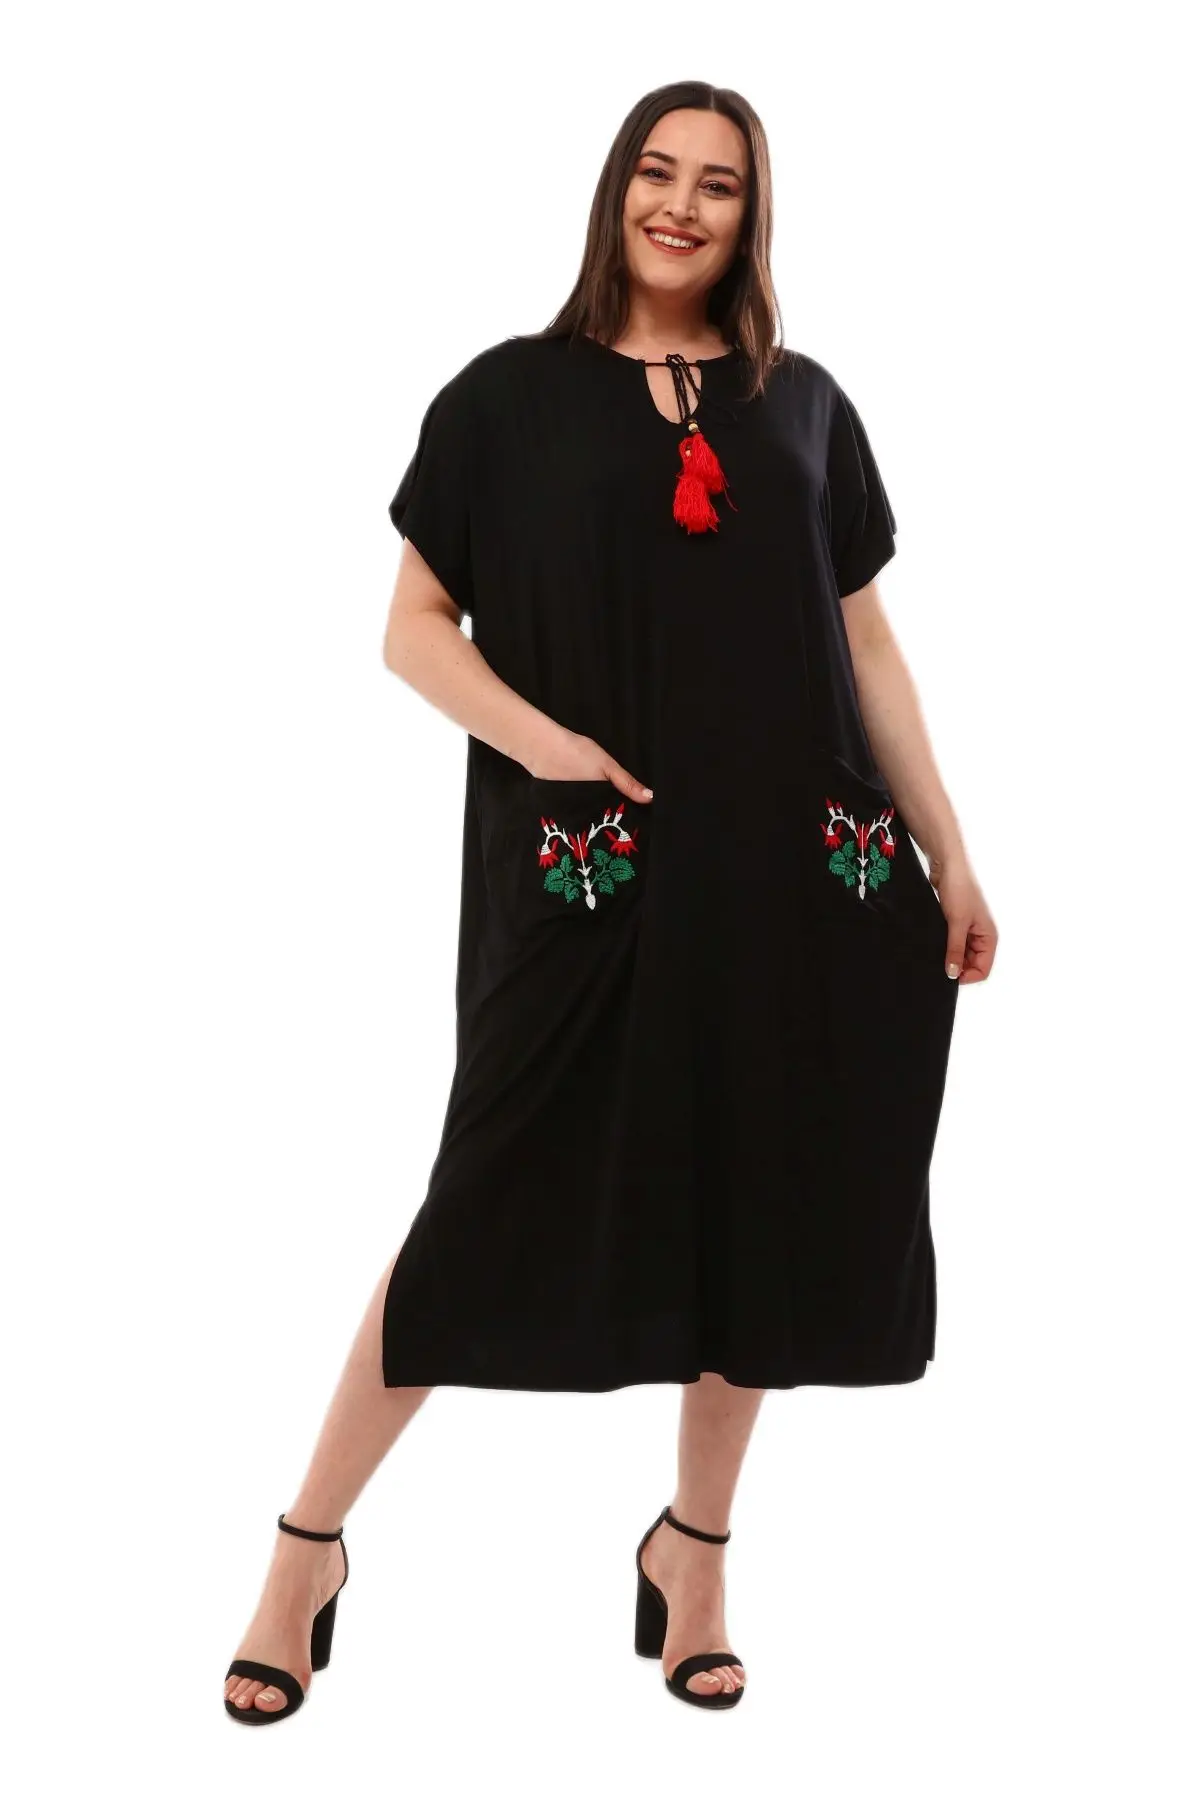 Women’s Plus Size Dress Flower Embroidery And Tassel Detail Wide Cut Comfortable, Designed and Made in Turkey, New Arrival